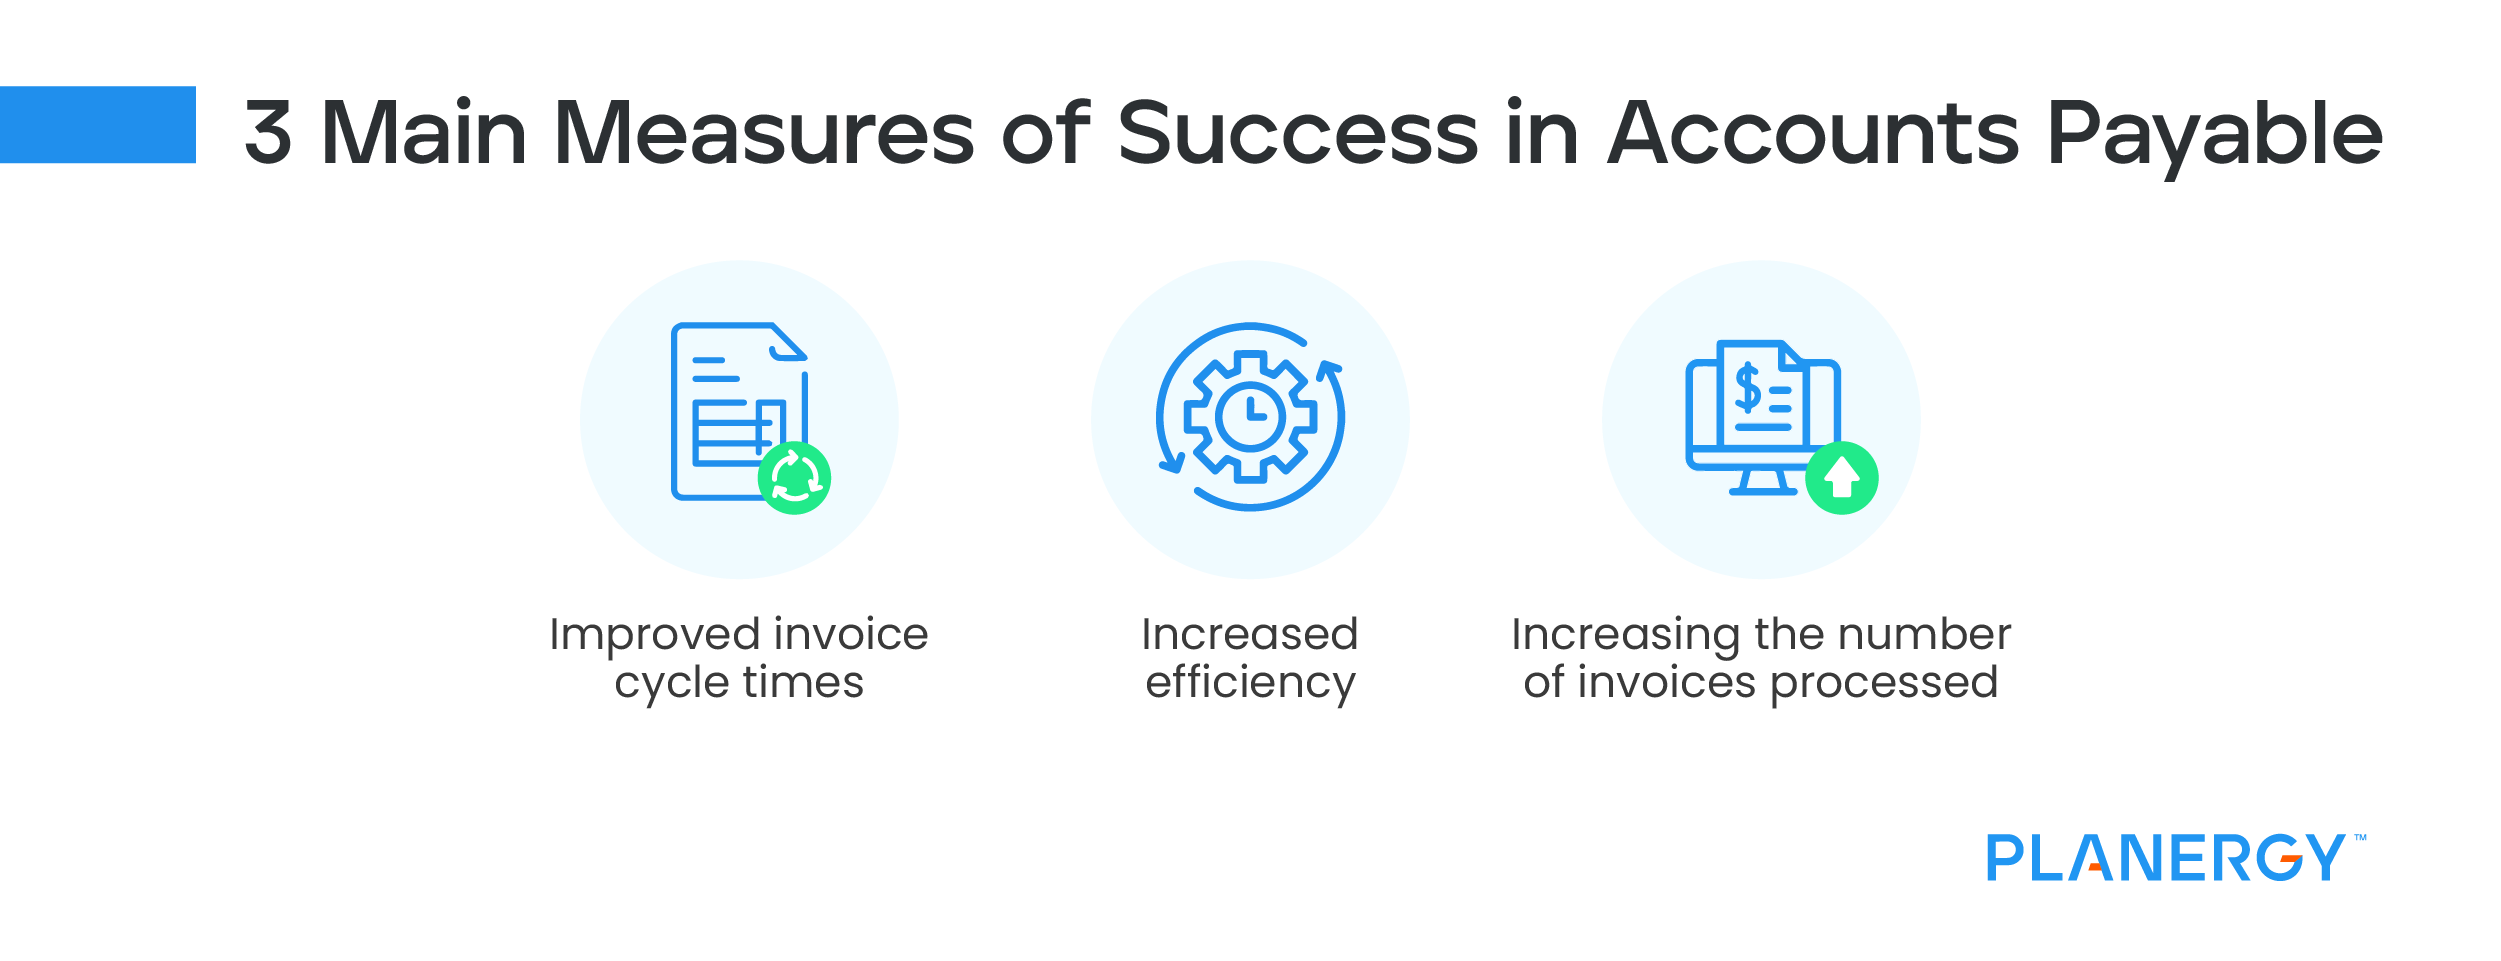 Measures of Success in Accounts Payable